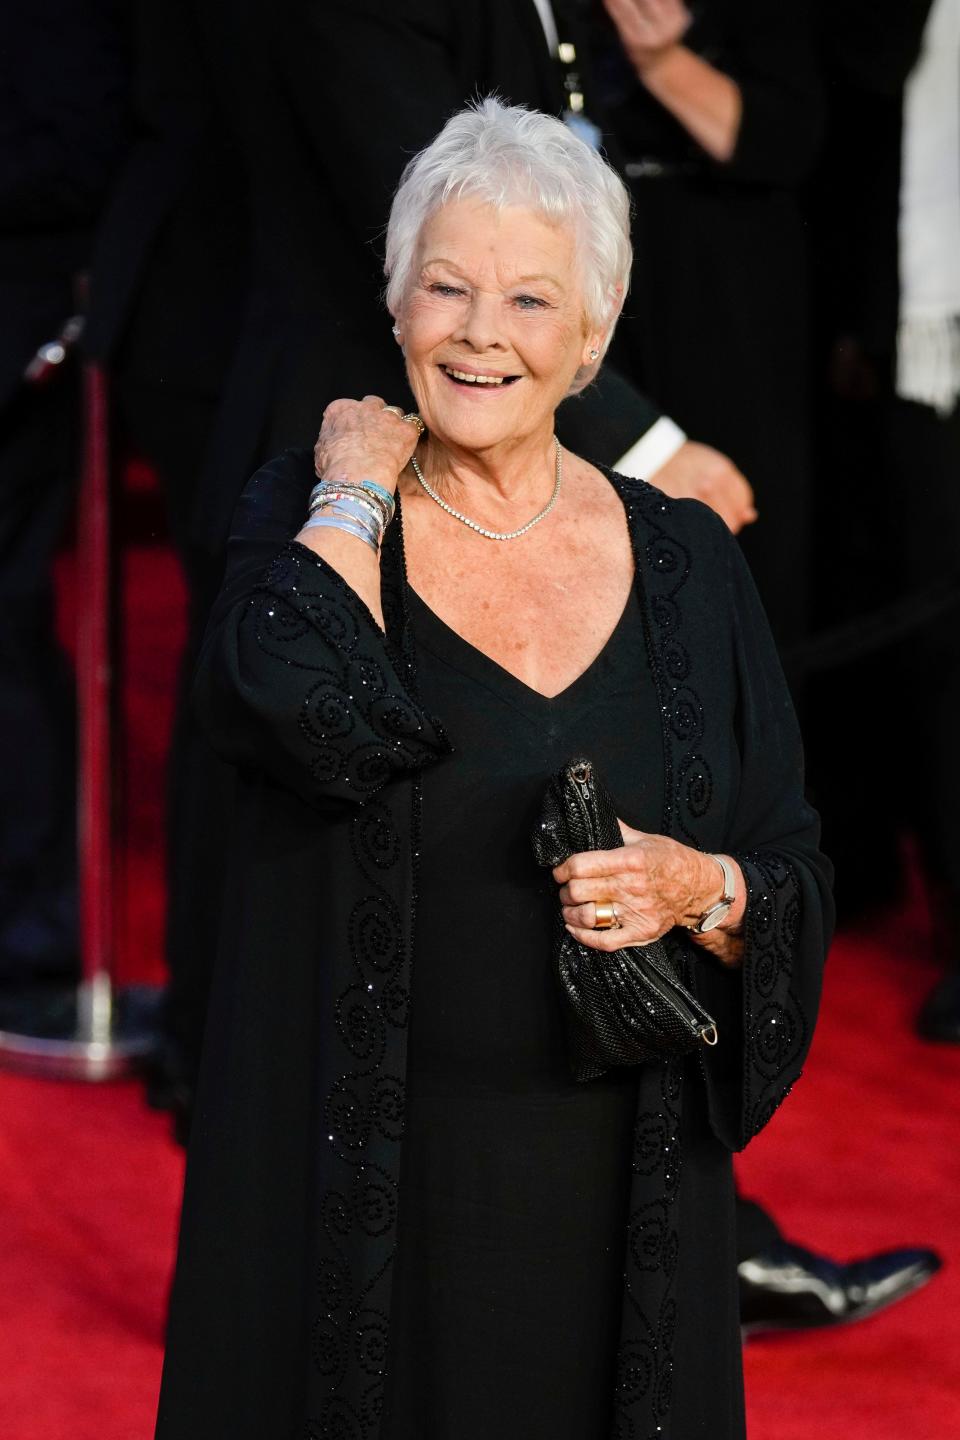 Judi Dench is opening up about the challenges brought on by her degenerative eye condition, revealing it has made reading scripts harder.